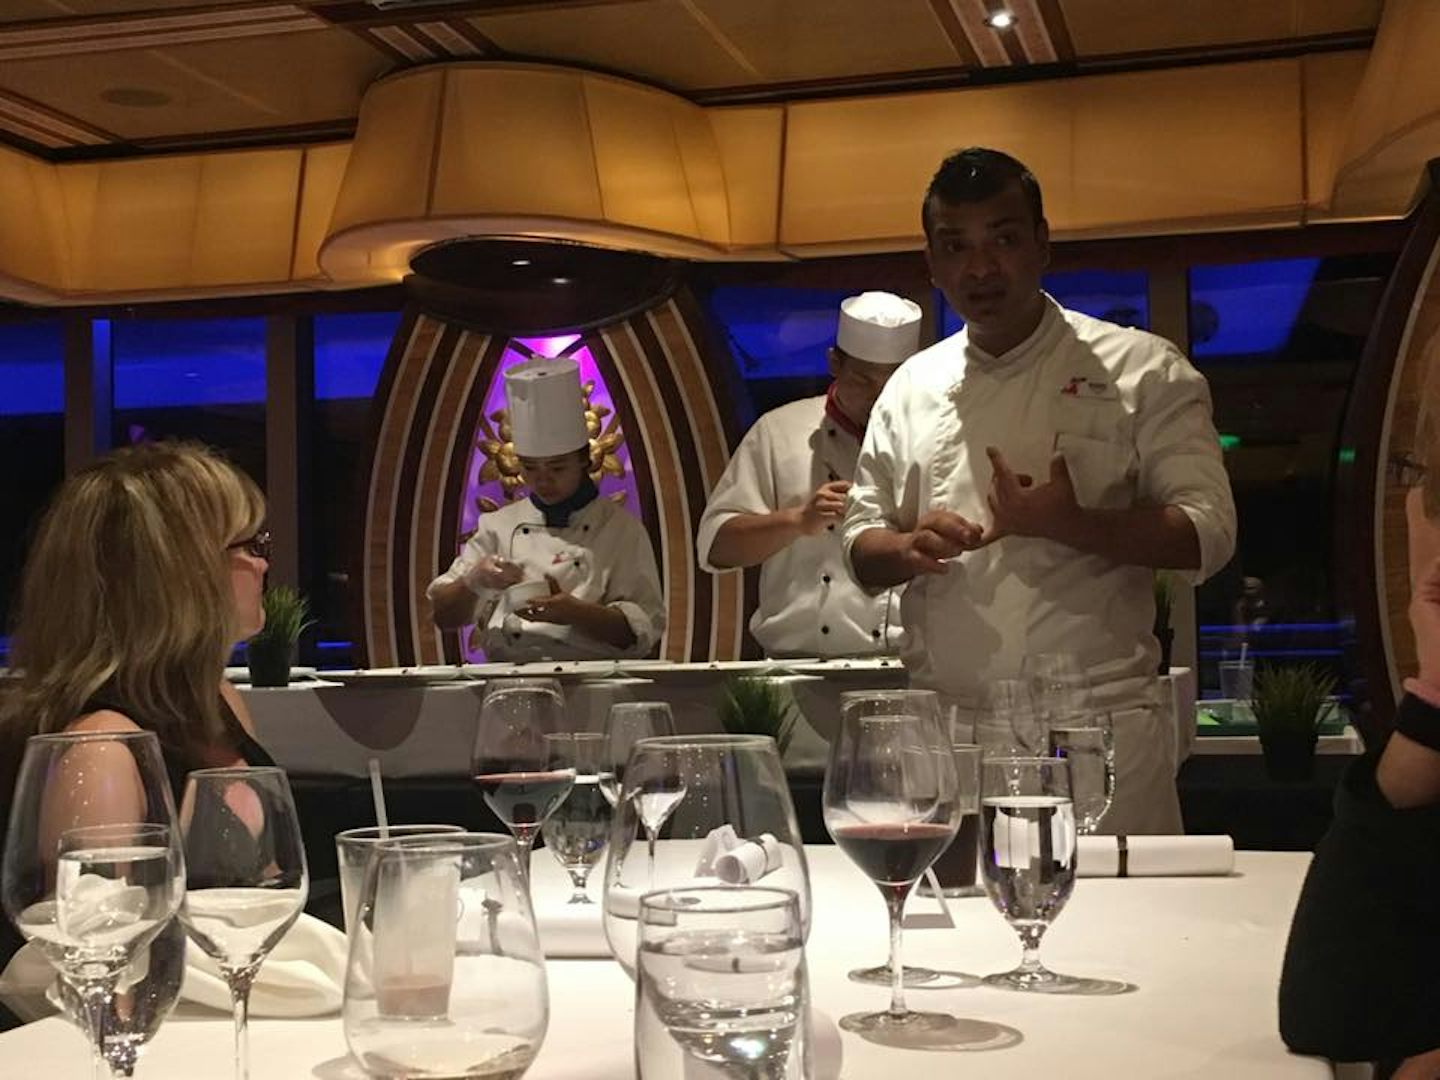 Chef's Table experience is amazing!